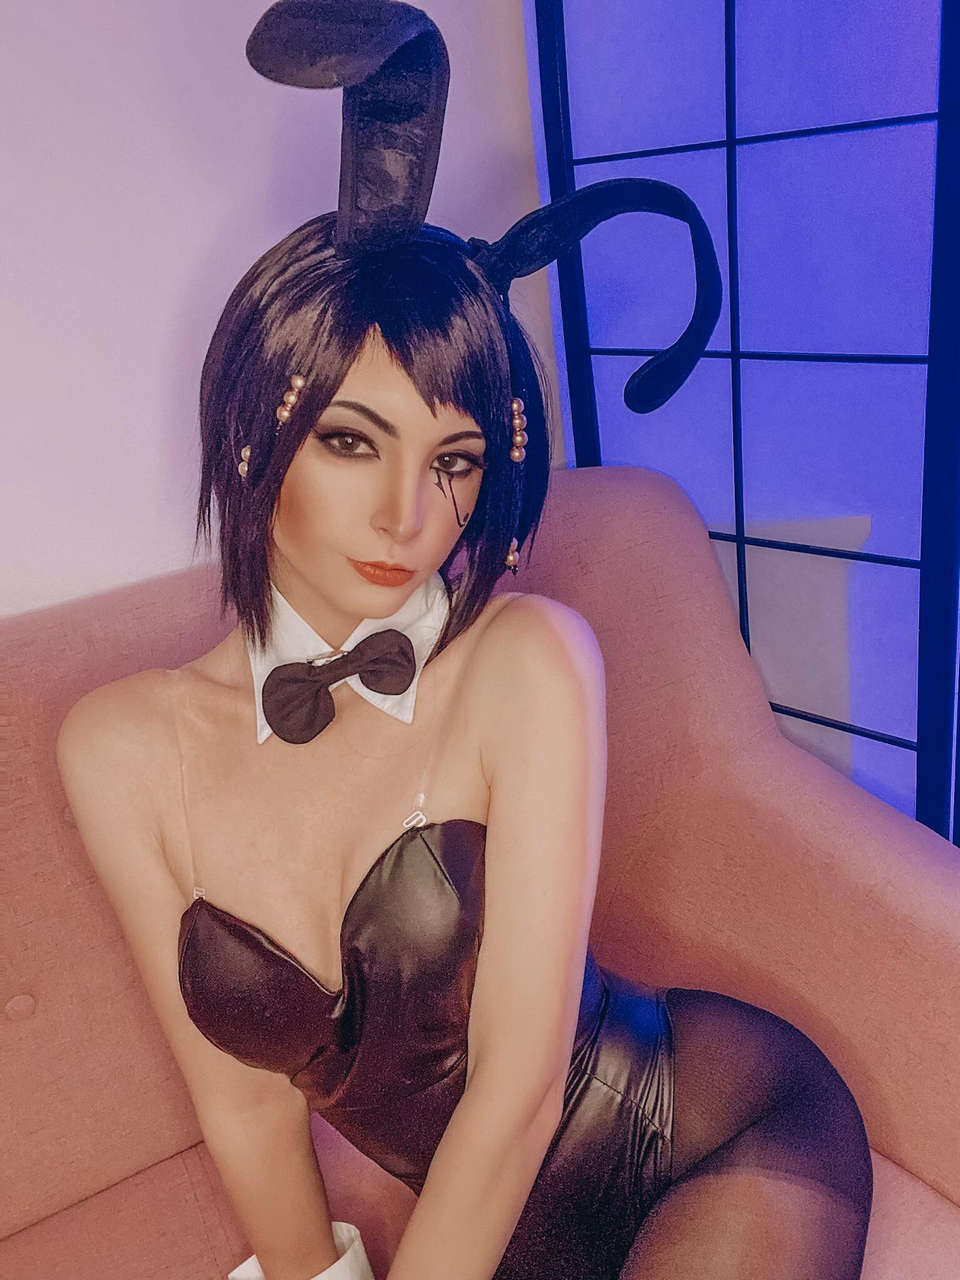 Pharah In Bunny Suit From Overwatch By Lilly Bakamoto Self Mirror Selfi